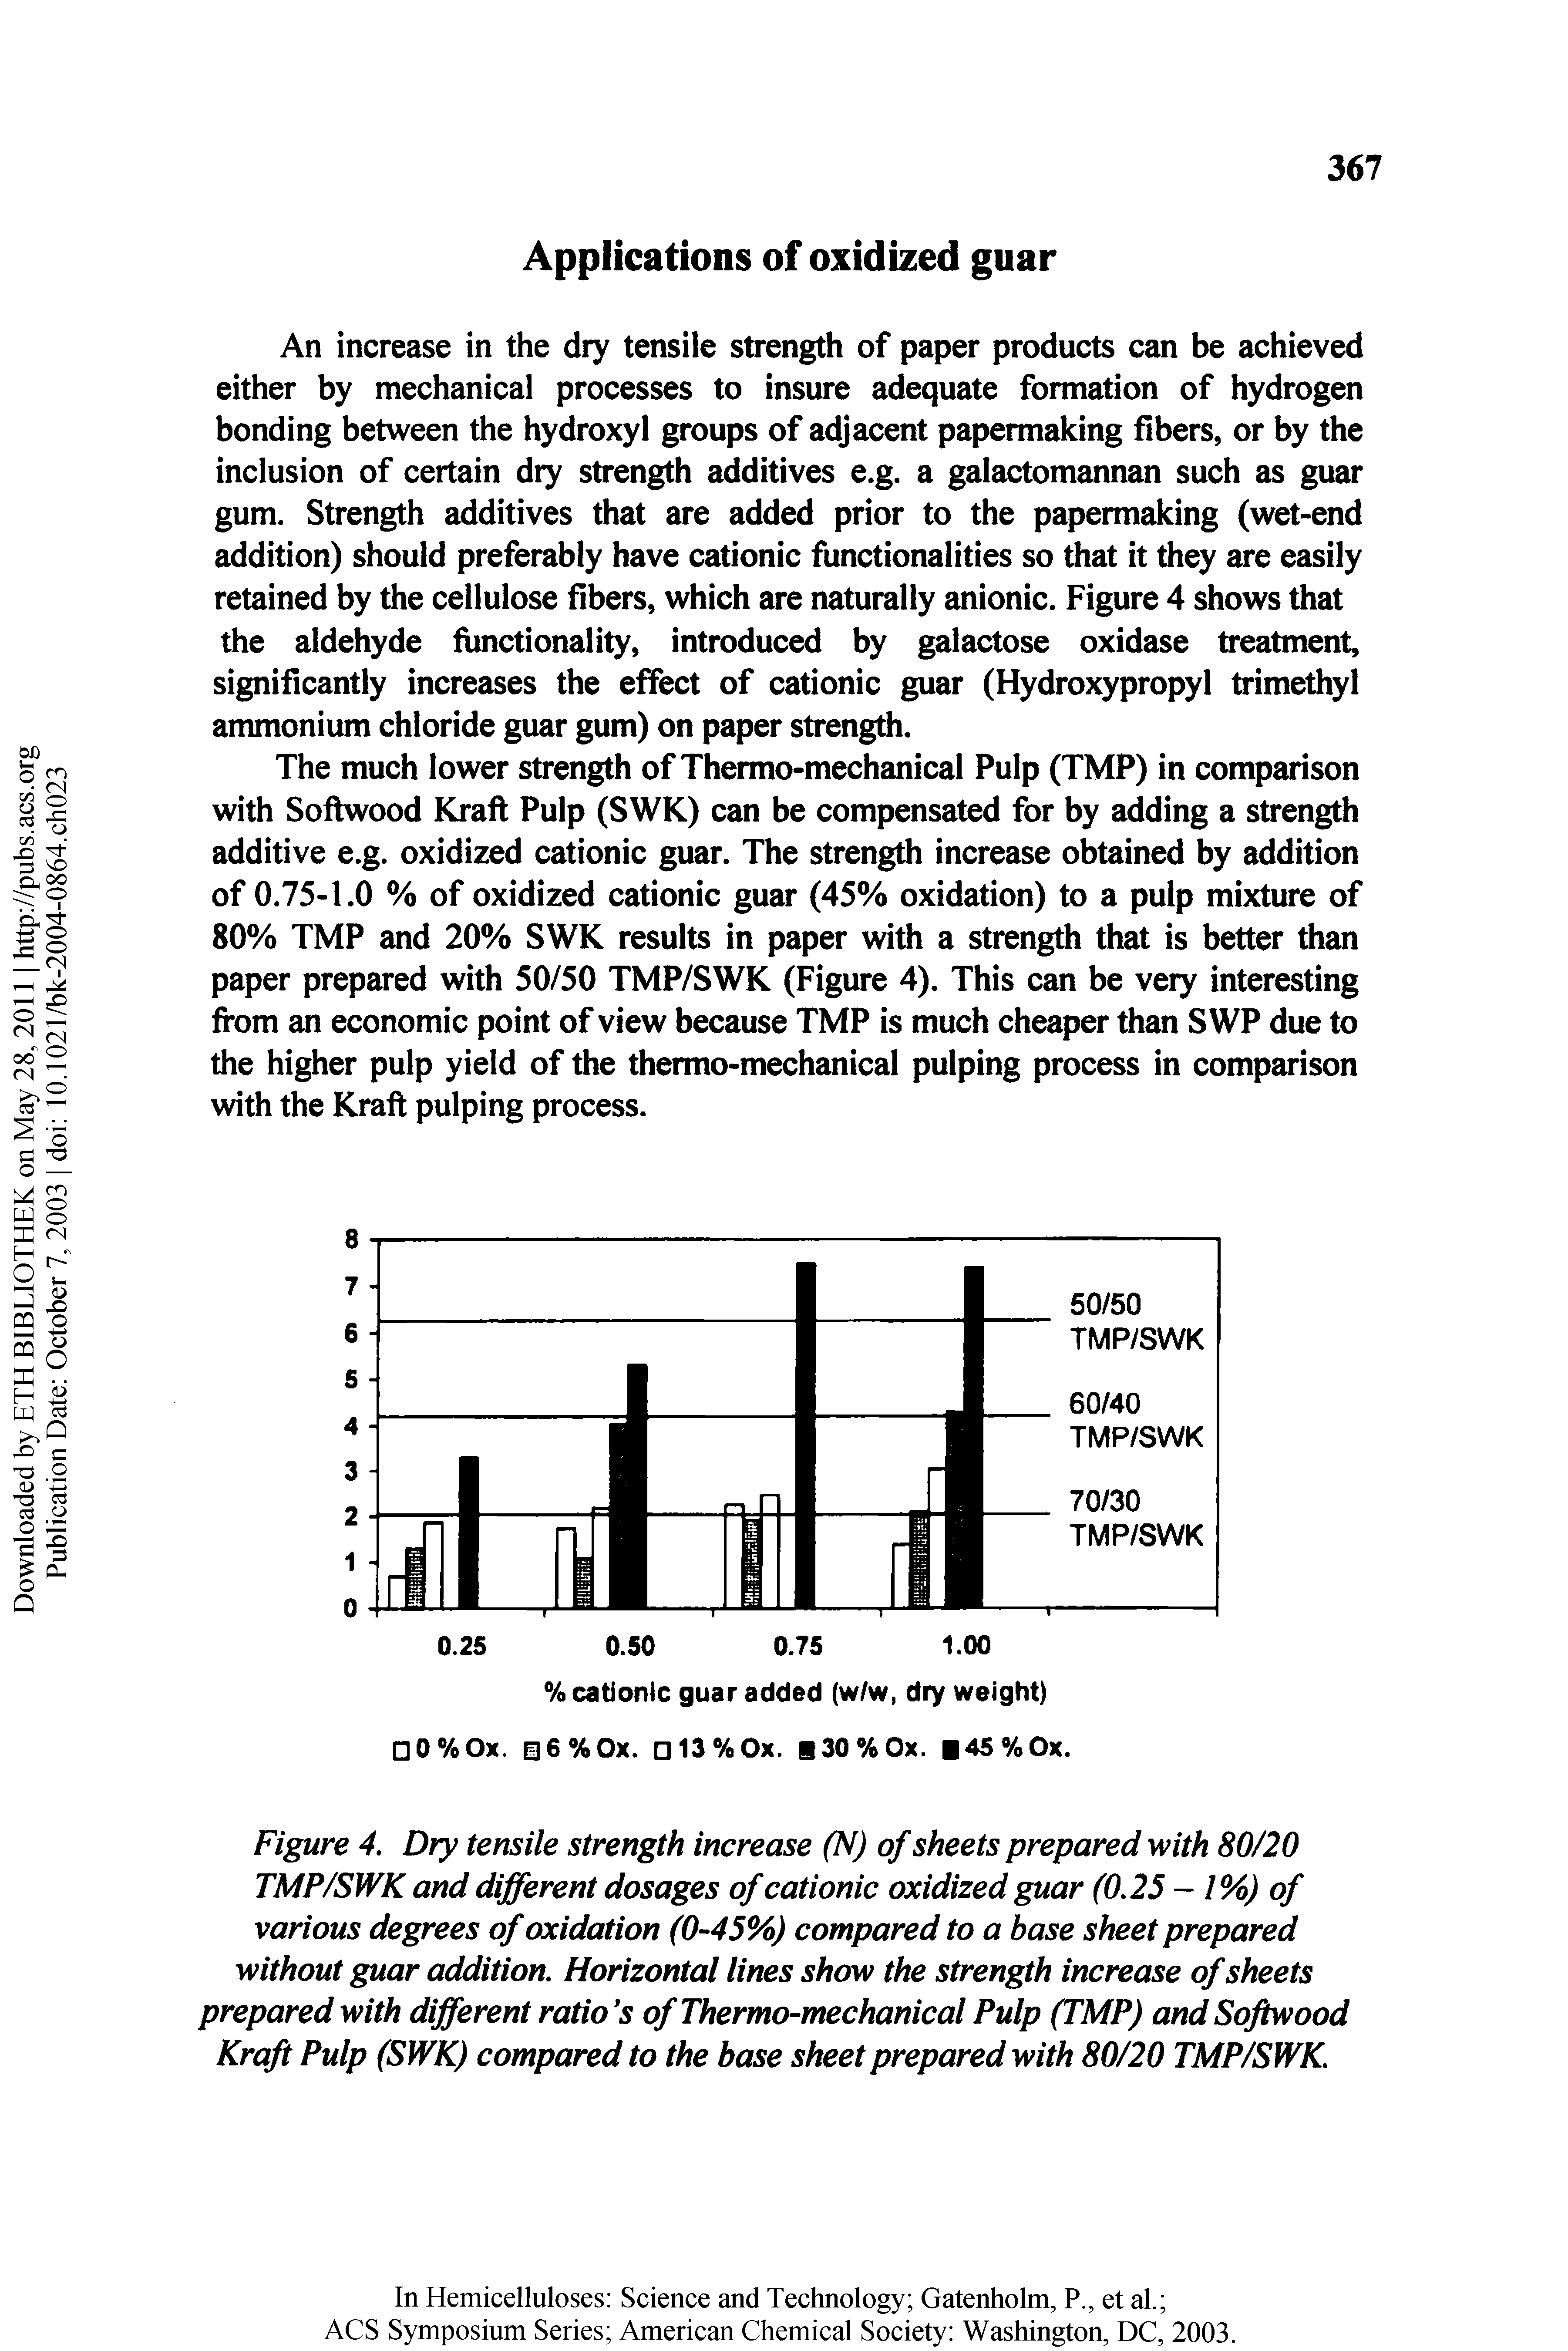 Figure 4. Dry tensile strength increase (N) of sheets prepared with 80/20 TMP/SWK and different dosages of cationic oxidized guar (0,25 - 1%) of various degrees of oxidation (0-45%) compared to a base sheet prepared without guar addition. Horizontal lines show the strength increase of sheets prepared with different ratio s of Thermo-mechanical Pulp (TMP) and Softwood Kraft Pulp (SWK) compared to the base sheet prepared with 80/20 TMP/SWK.